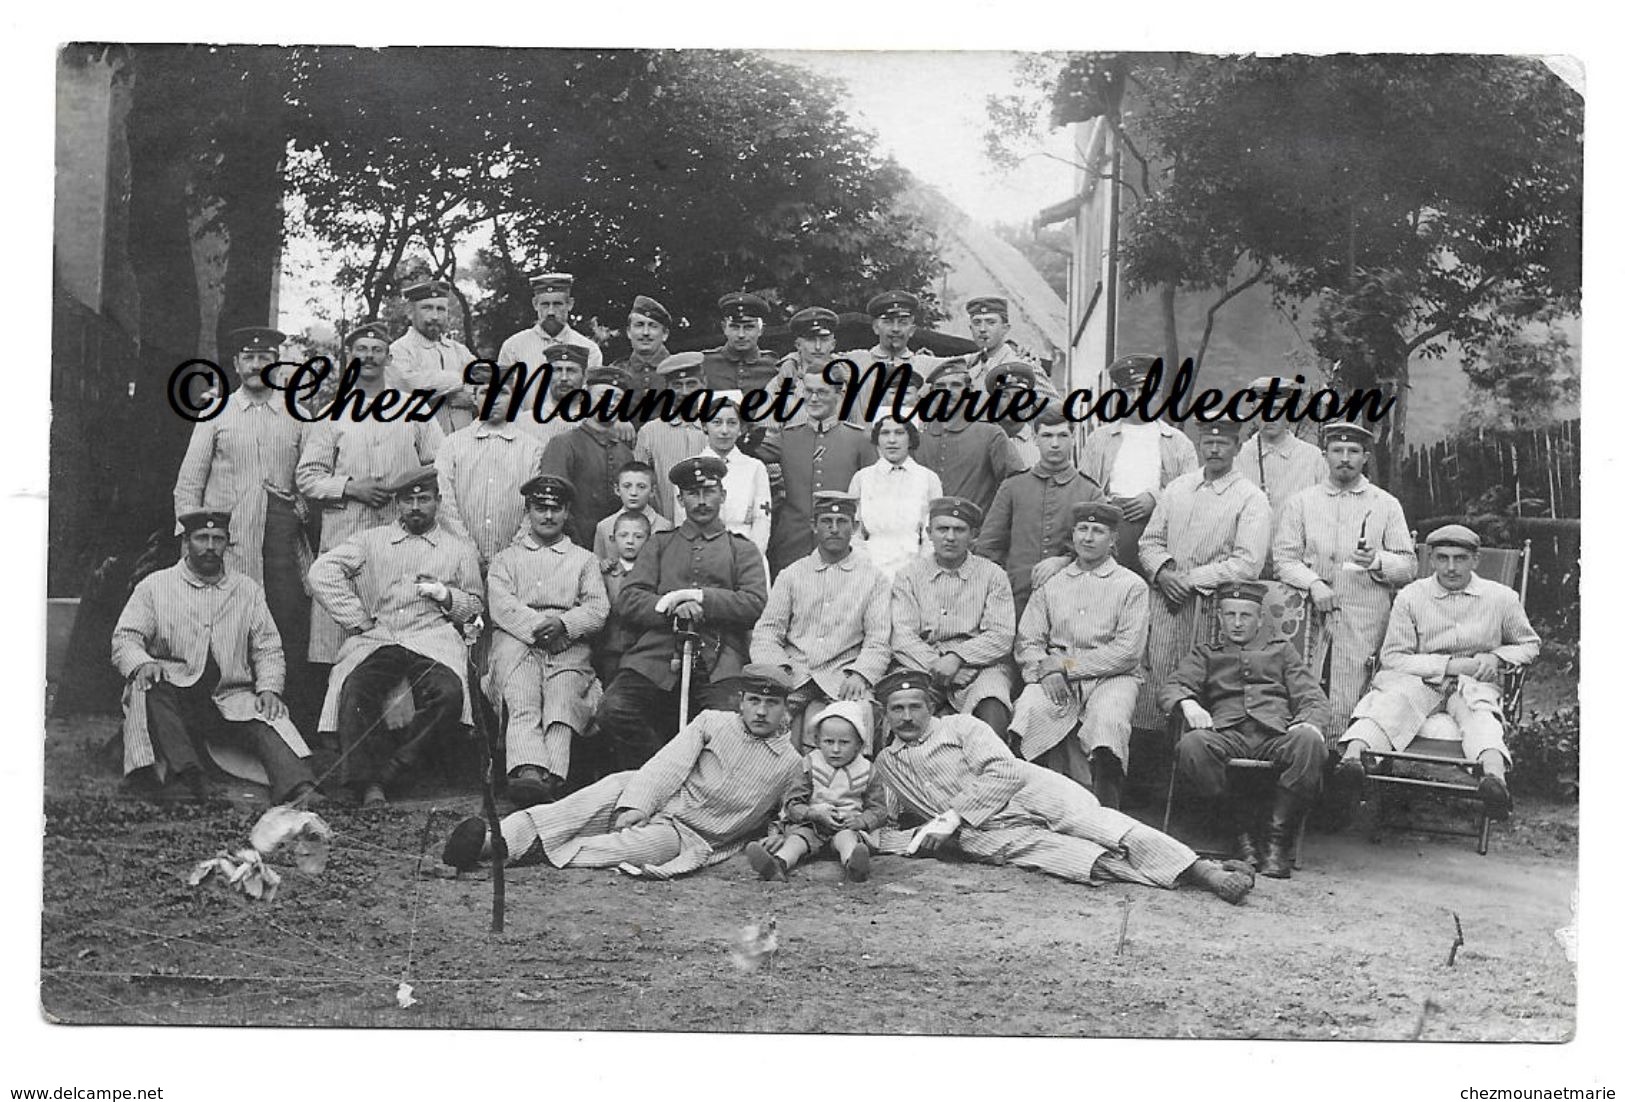 WWI NEURODE NOWA RUDA - BLESSES ALLEMANDS - HOPITAL MILITAIRE - EULENGEBIRGE POLOGNE - CARTE PHOTO - ALLEMAND - Polonia